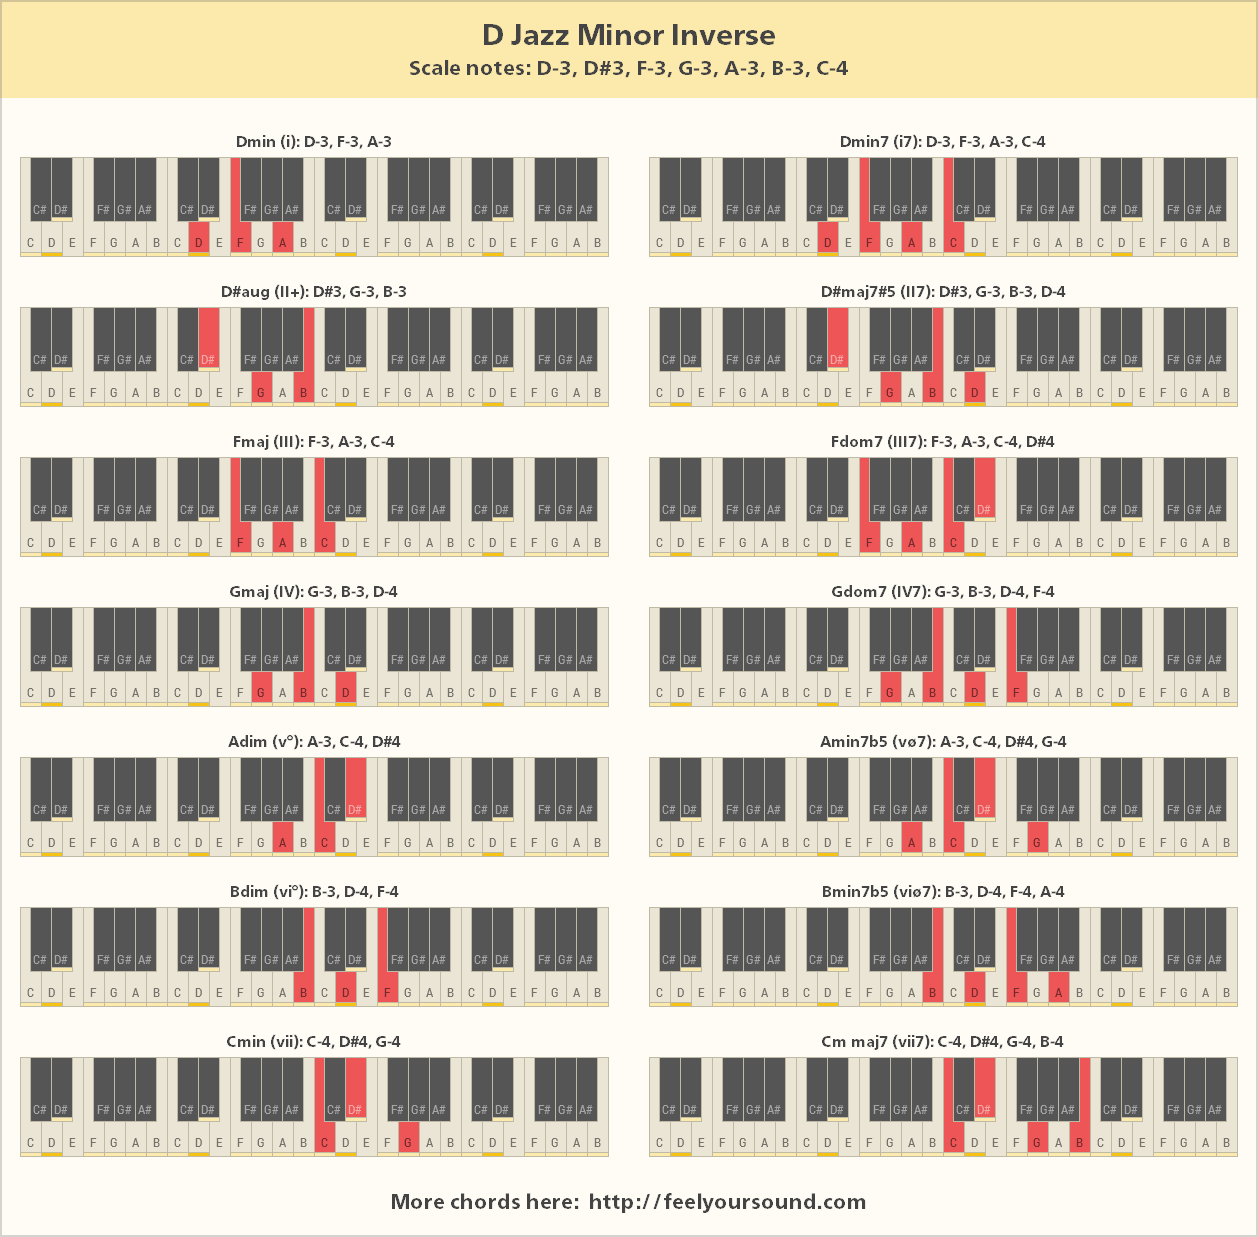 All important chords of D Jazz Minor Inverse